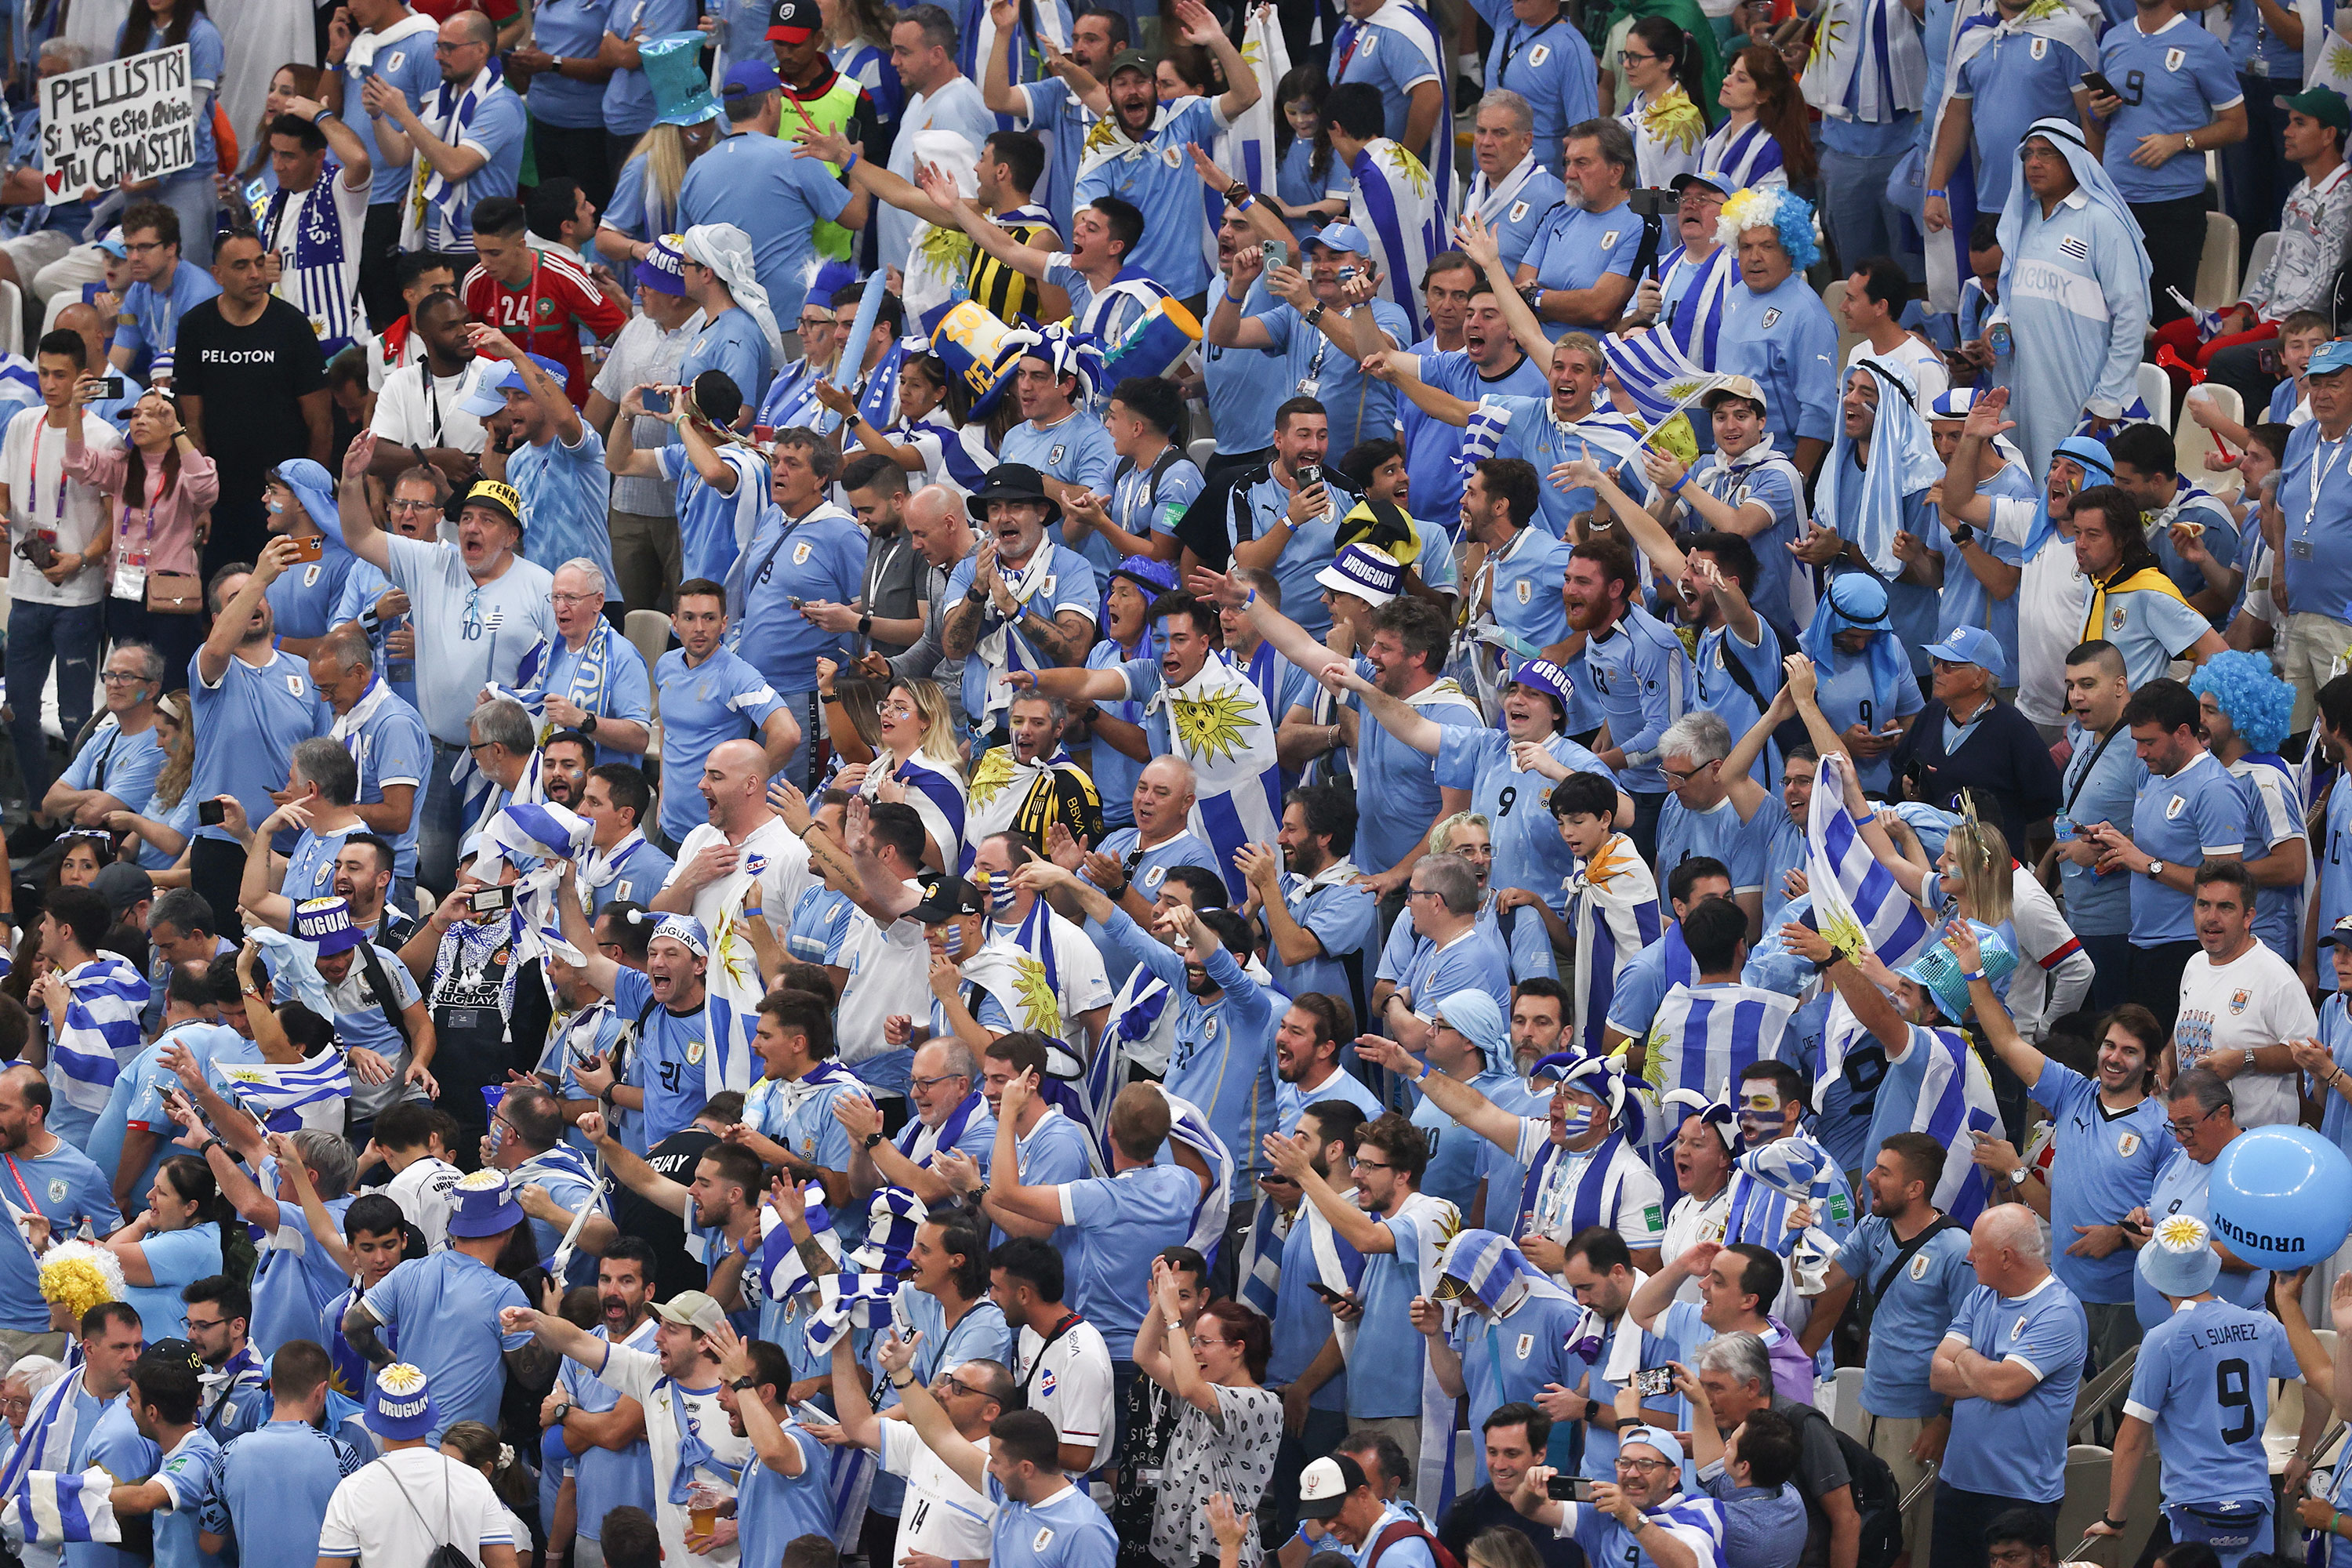 Fans of Uruguay are seen ahead of the match on Monday.